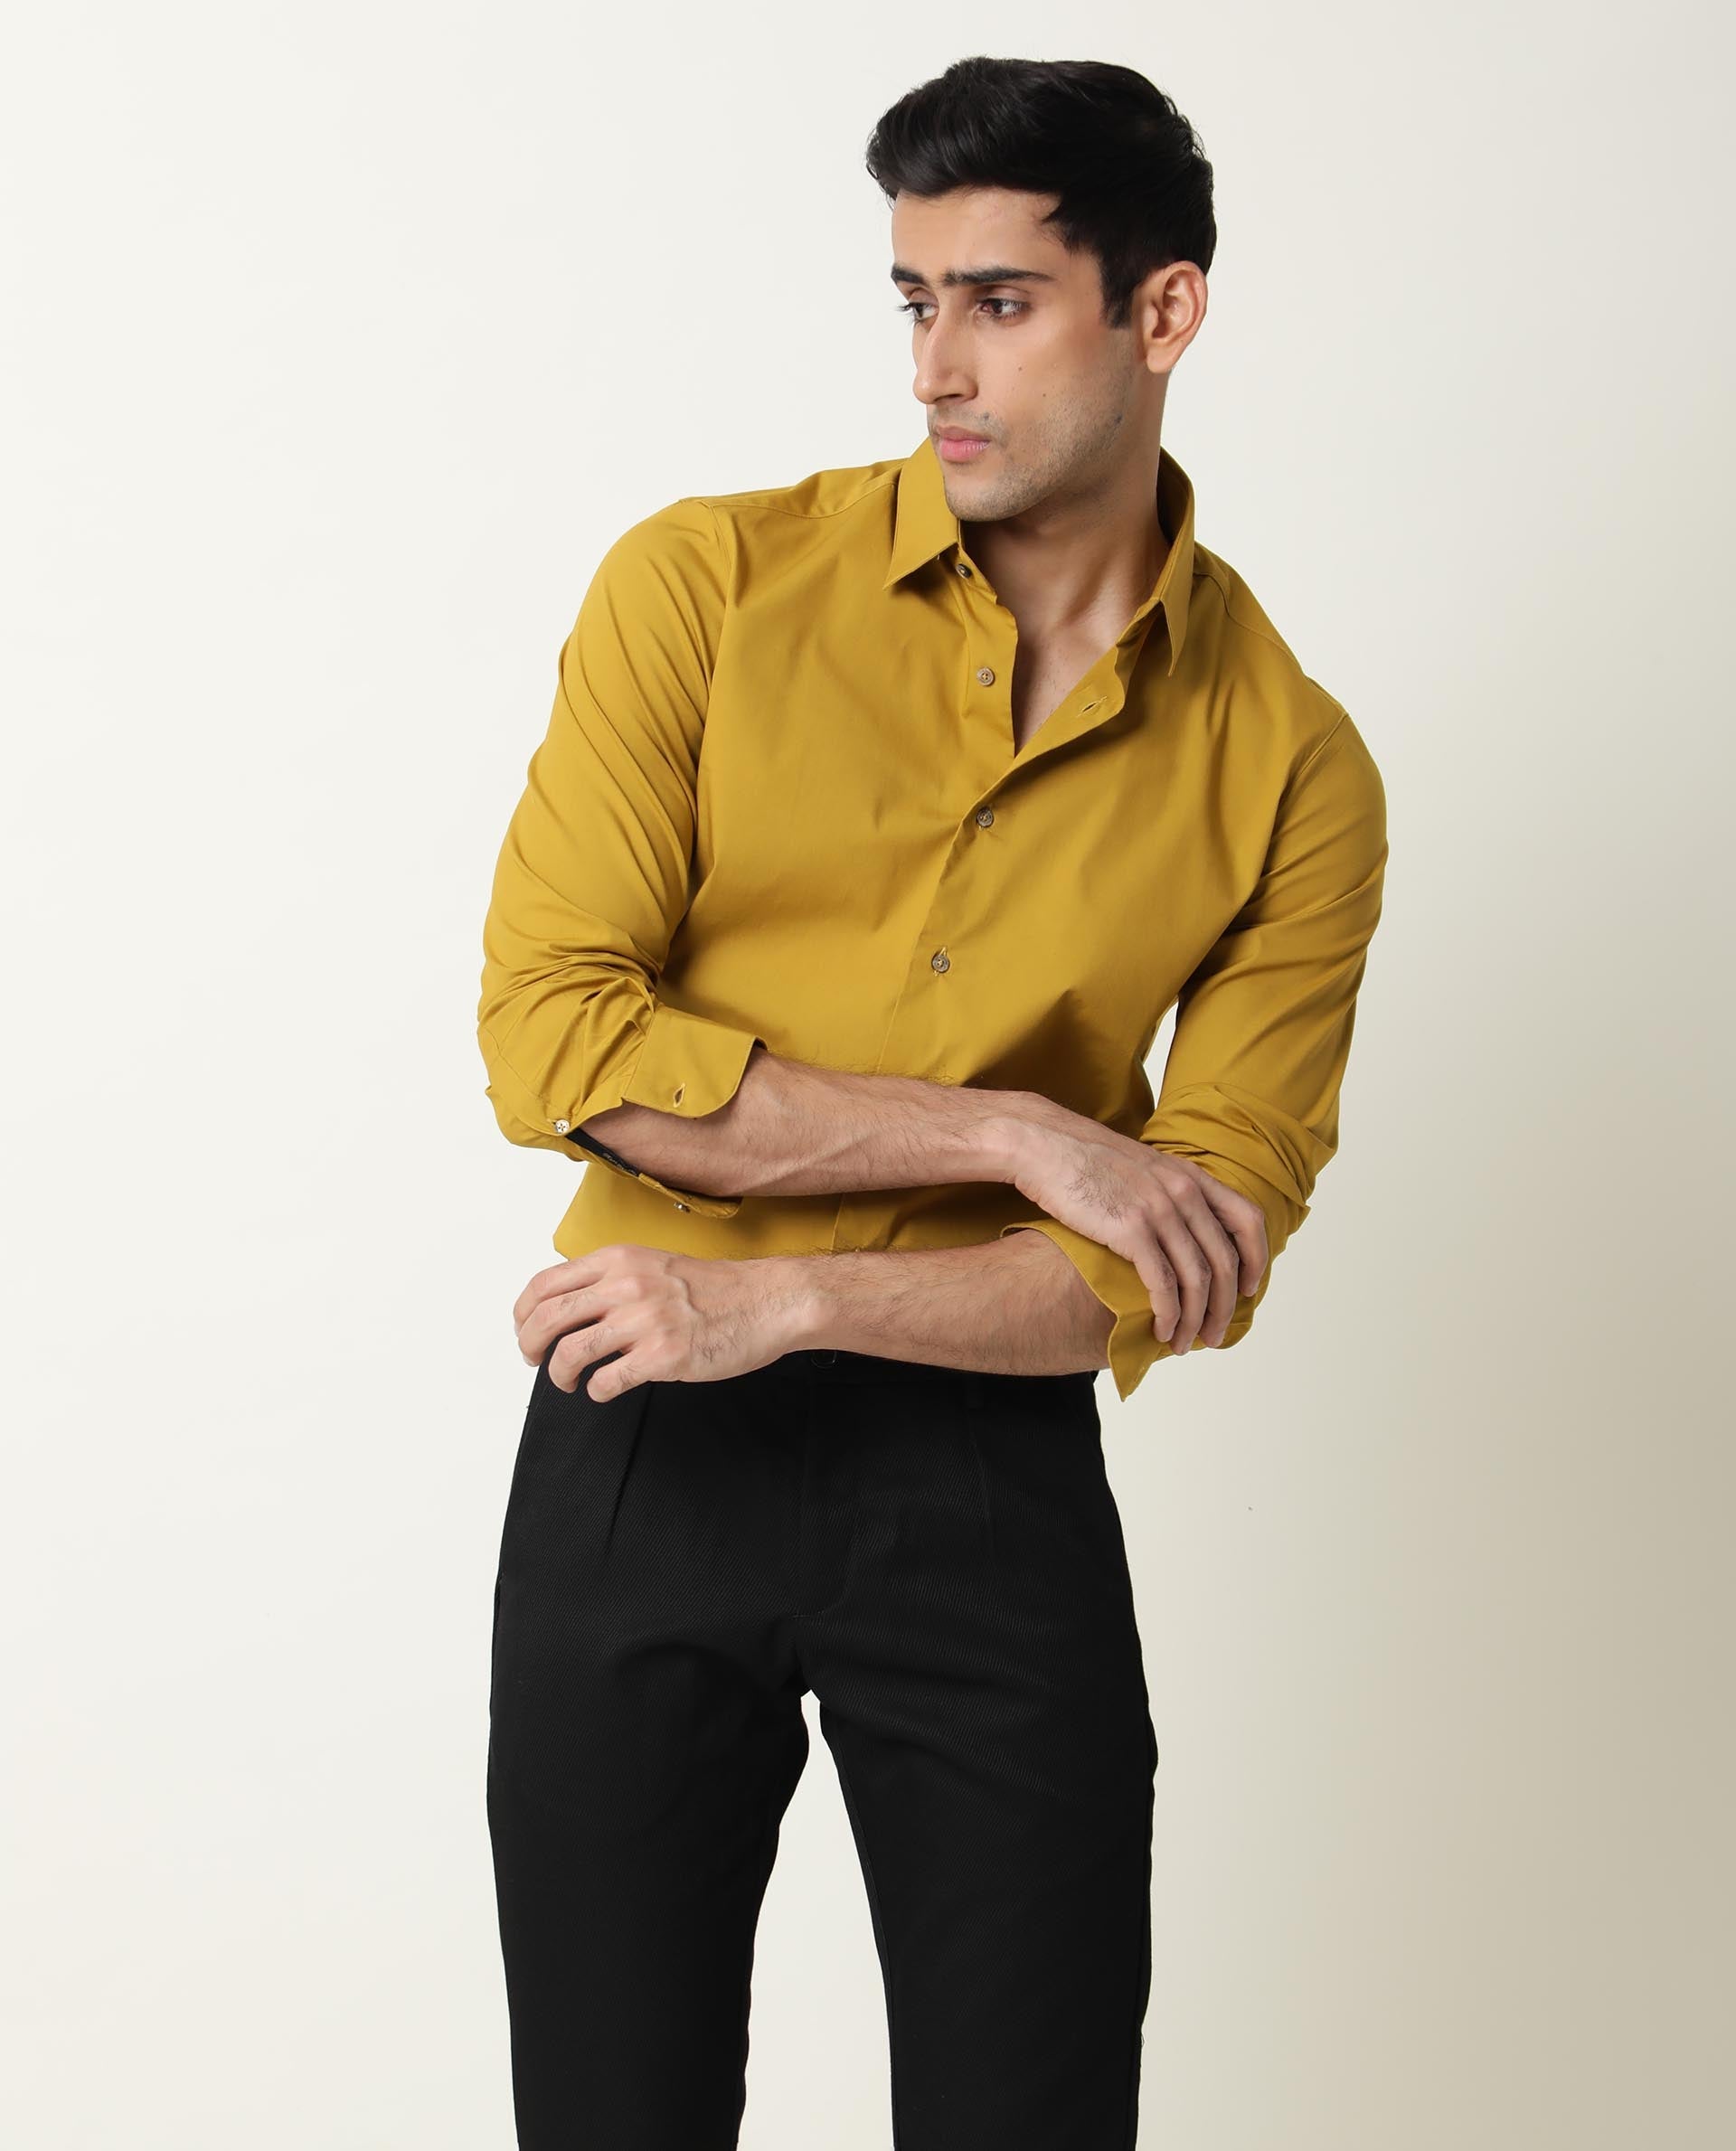 Share more than 156 black shirt with yellow pants latest